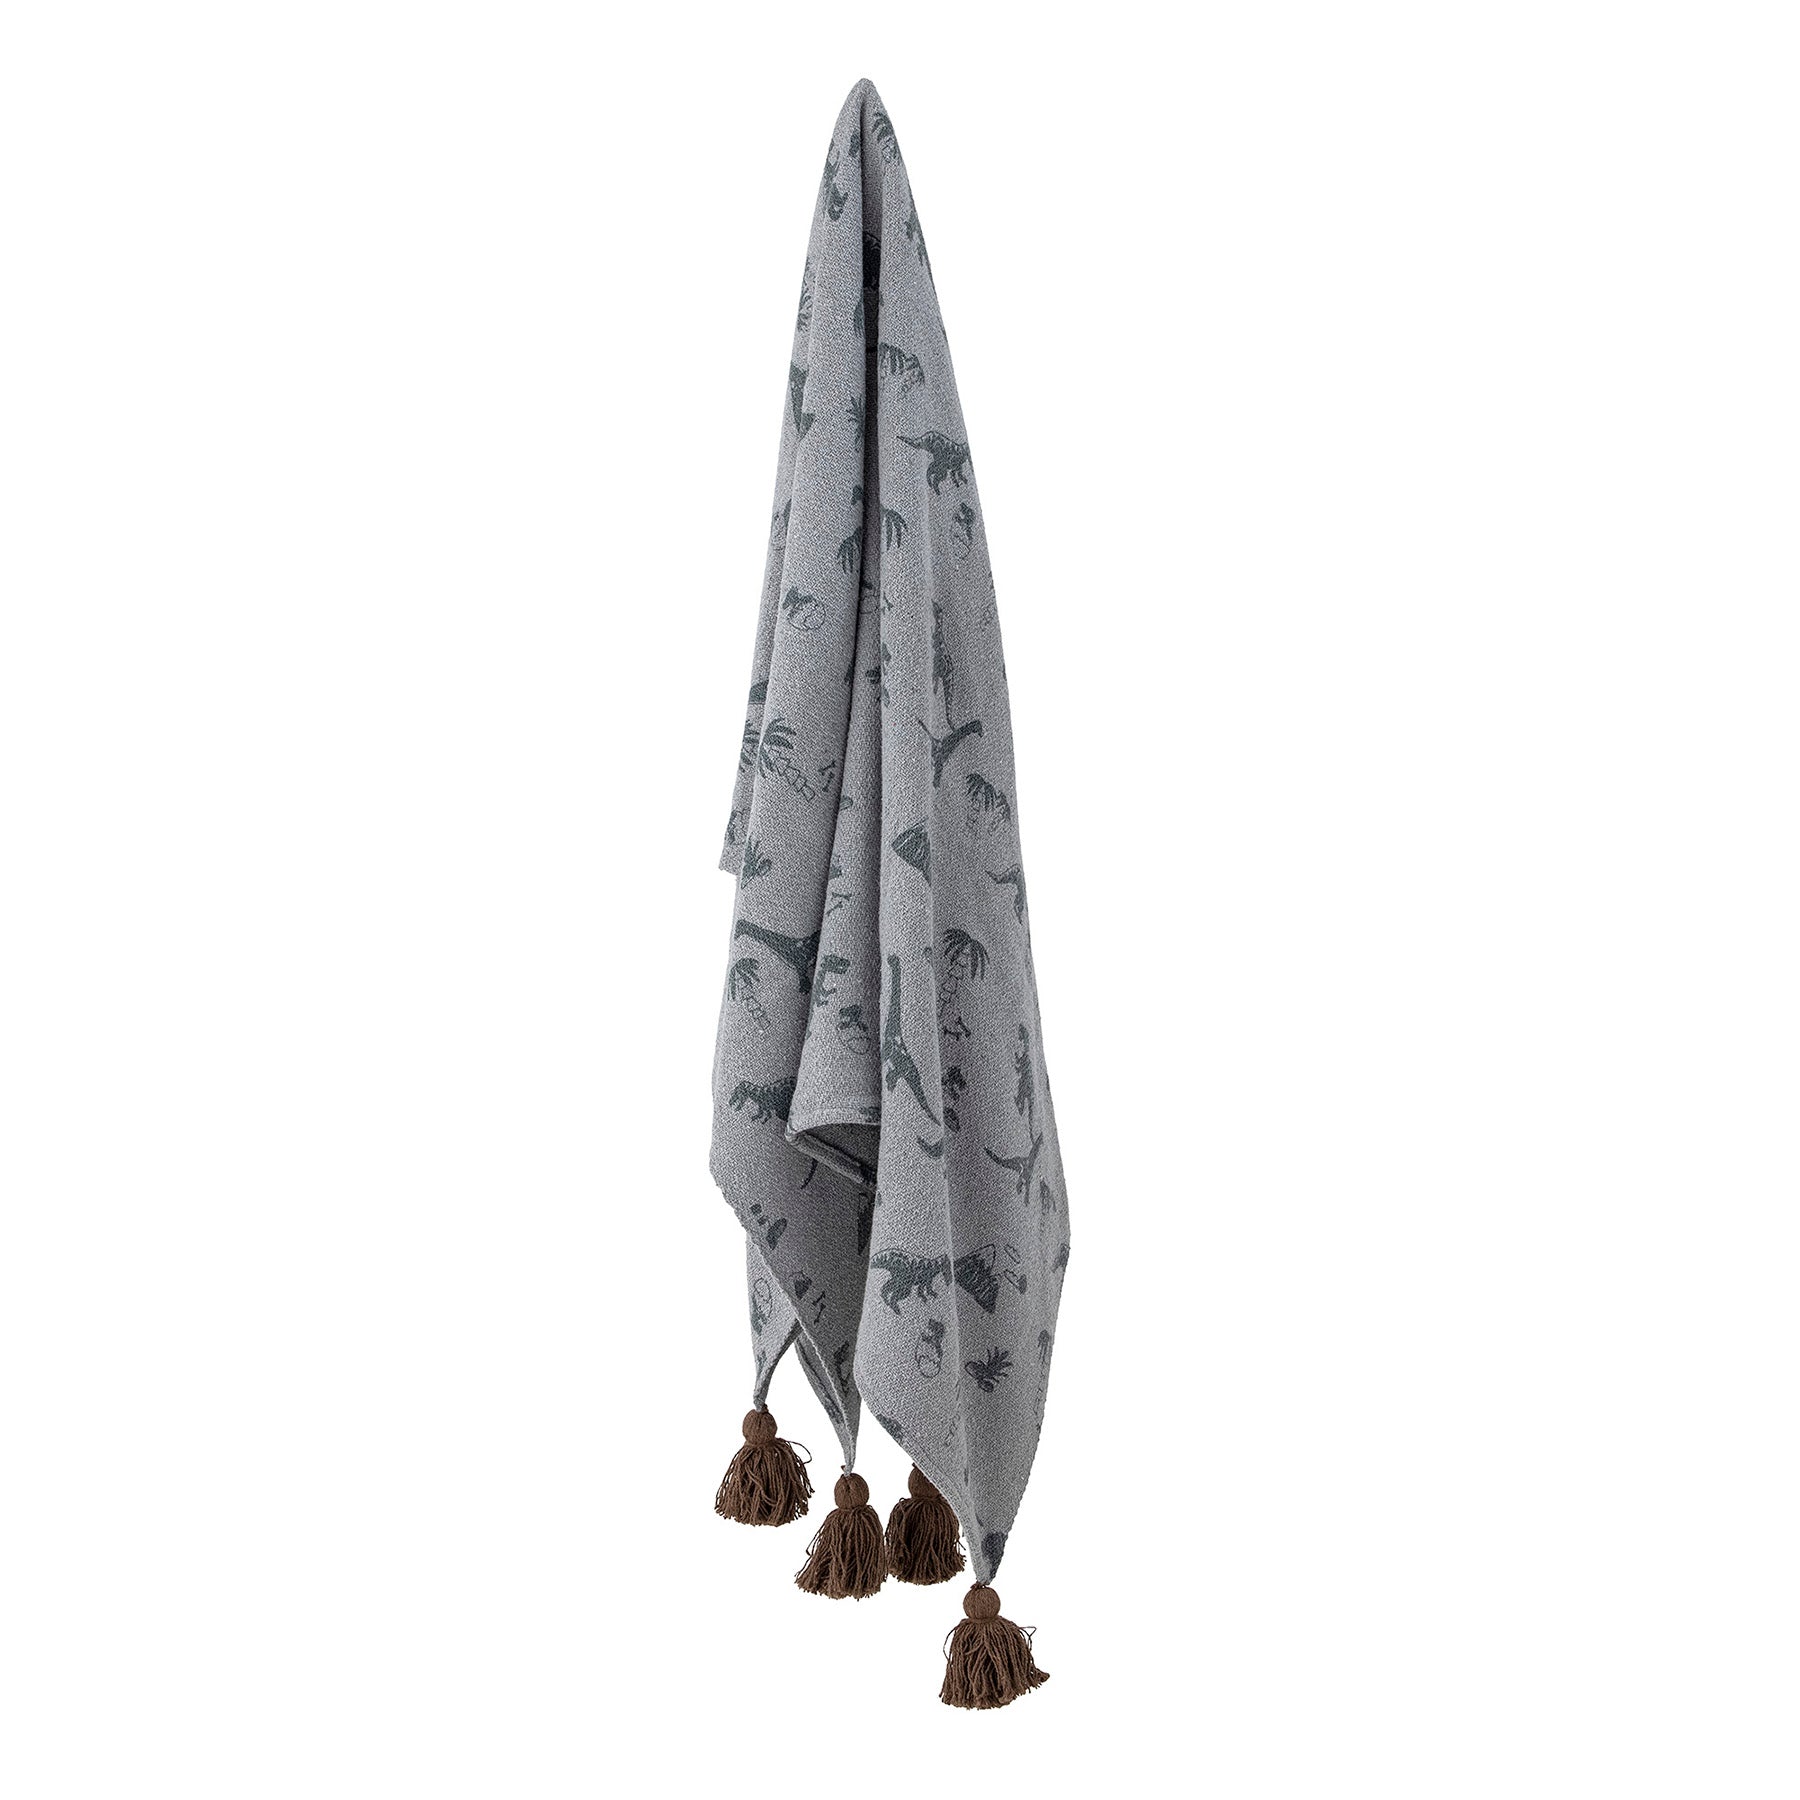 Generosa Home-The Bongo Throw by Bloomingville MINI is made of recycled cotton with a print of dinosaurs. The blanket has tassels in each corner for a cozy look. Dimensions: L160xW130 cm